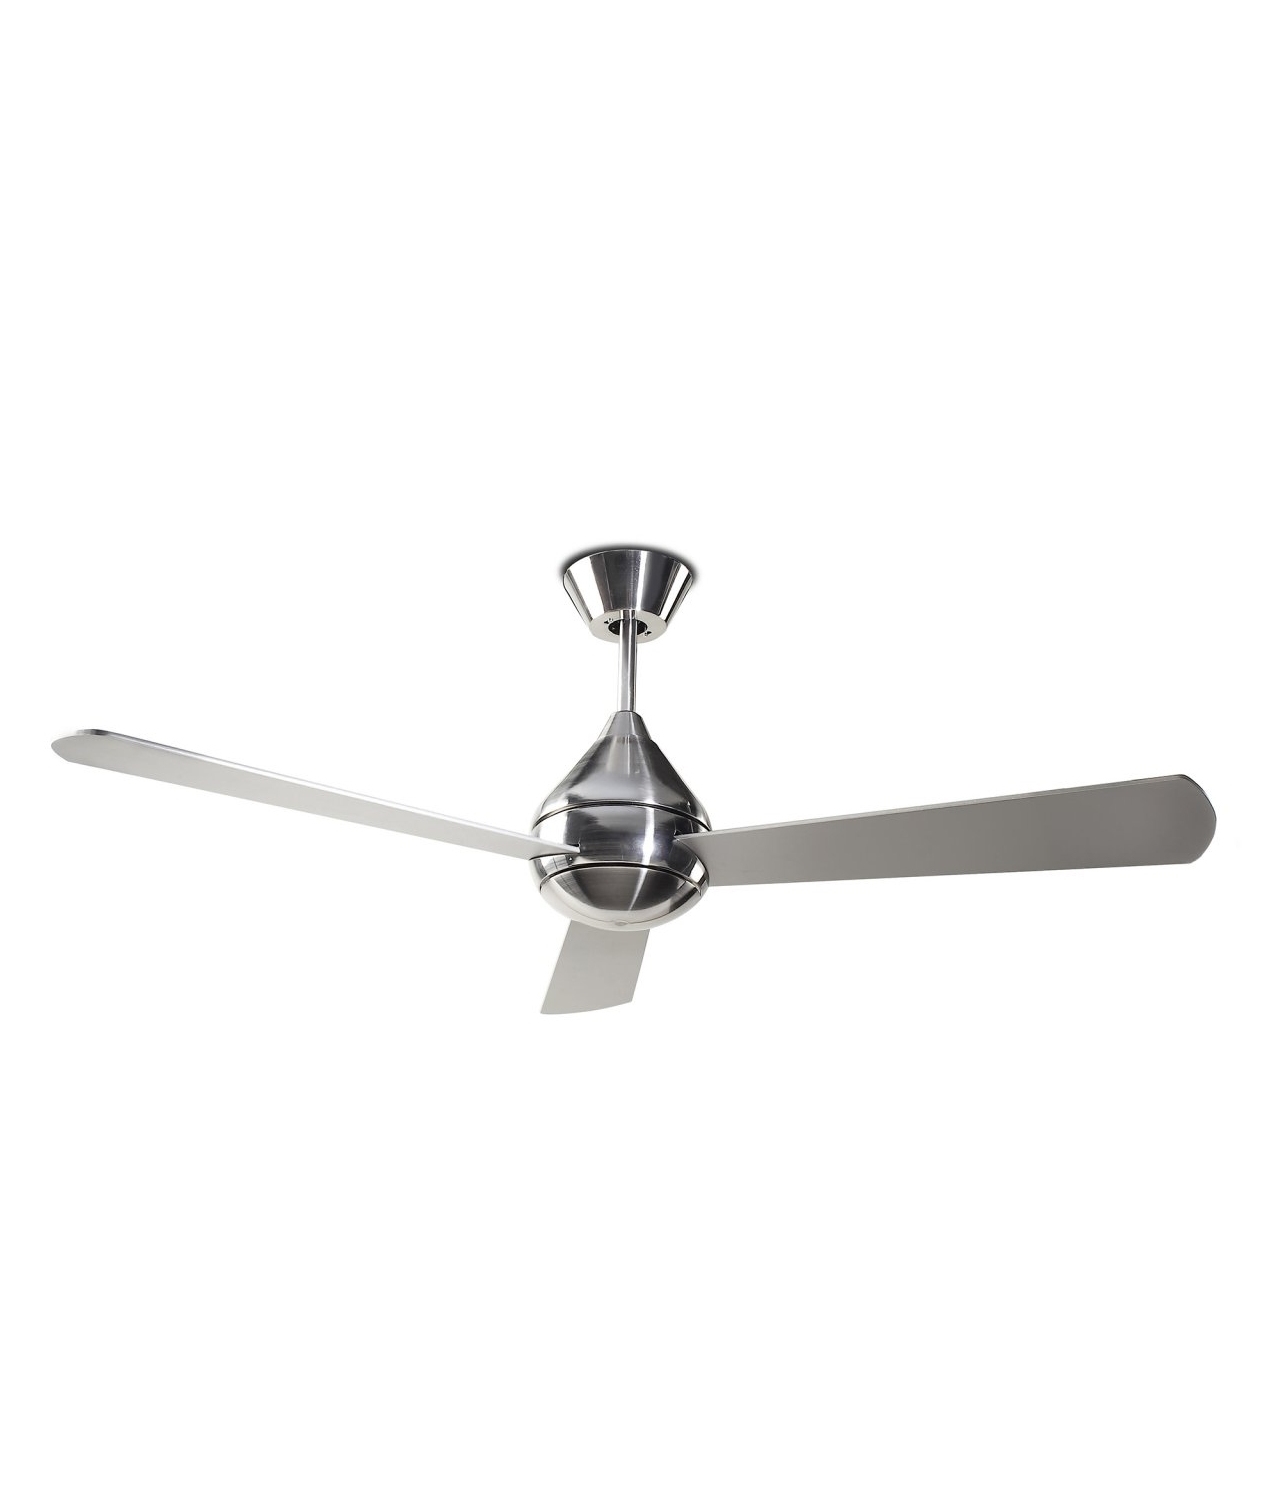 Modern Ceiling Fan with Three Reversible Blades. Offered ...